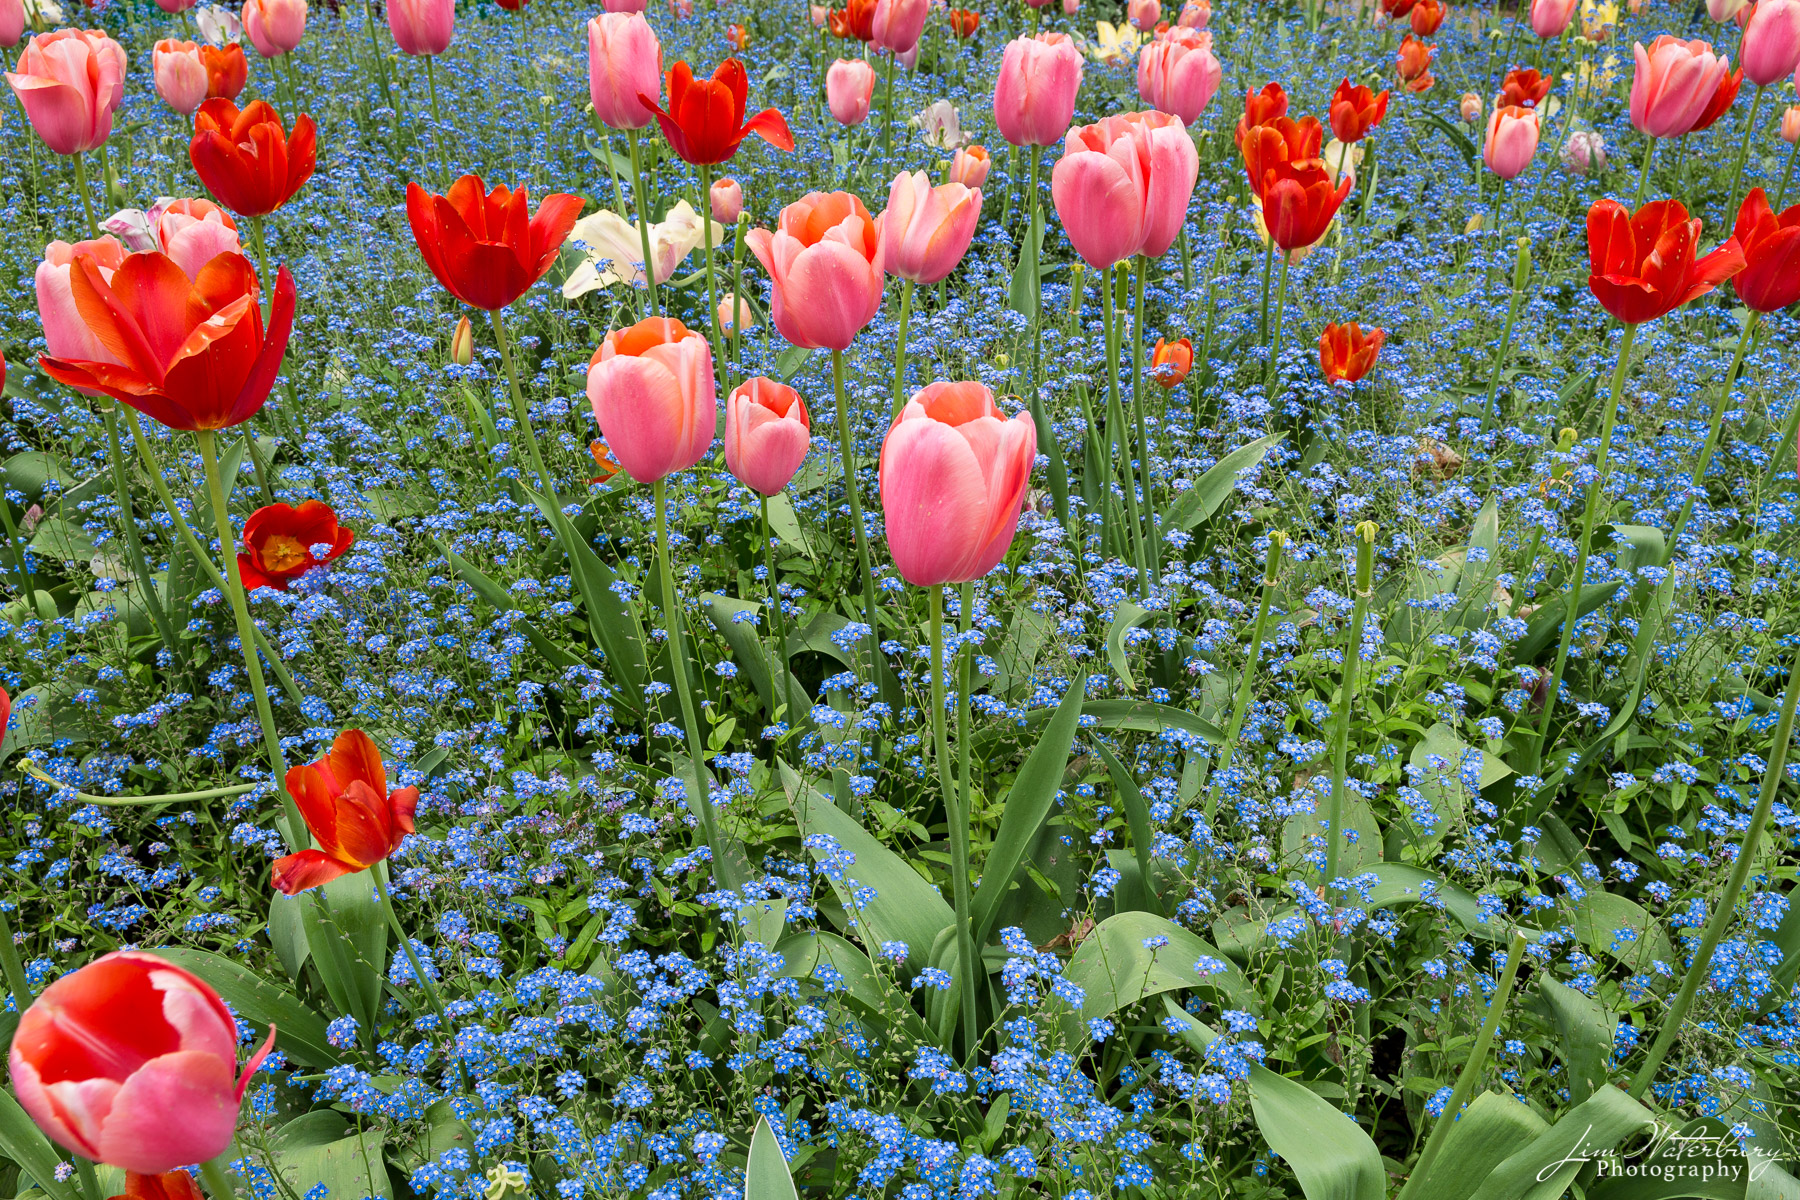 Monet's Gardens at Giverny